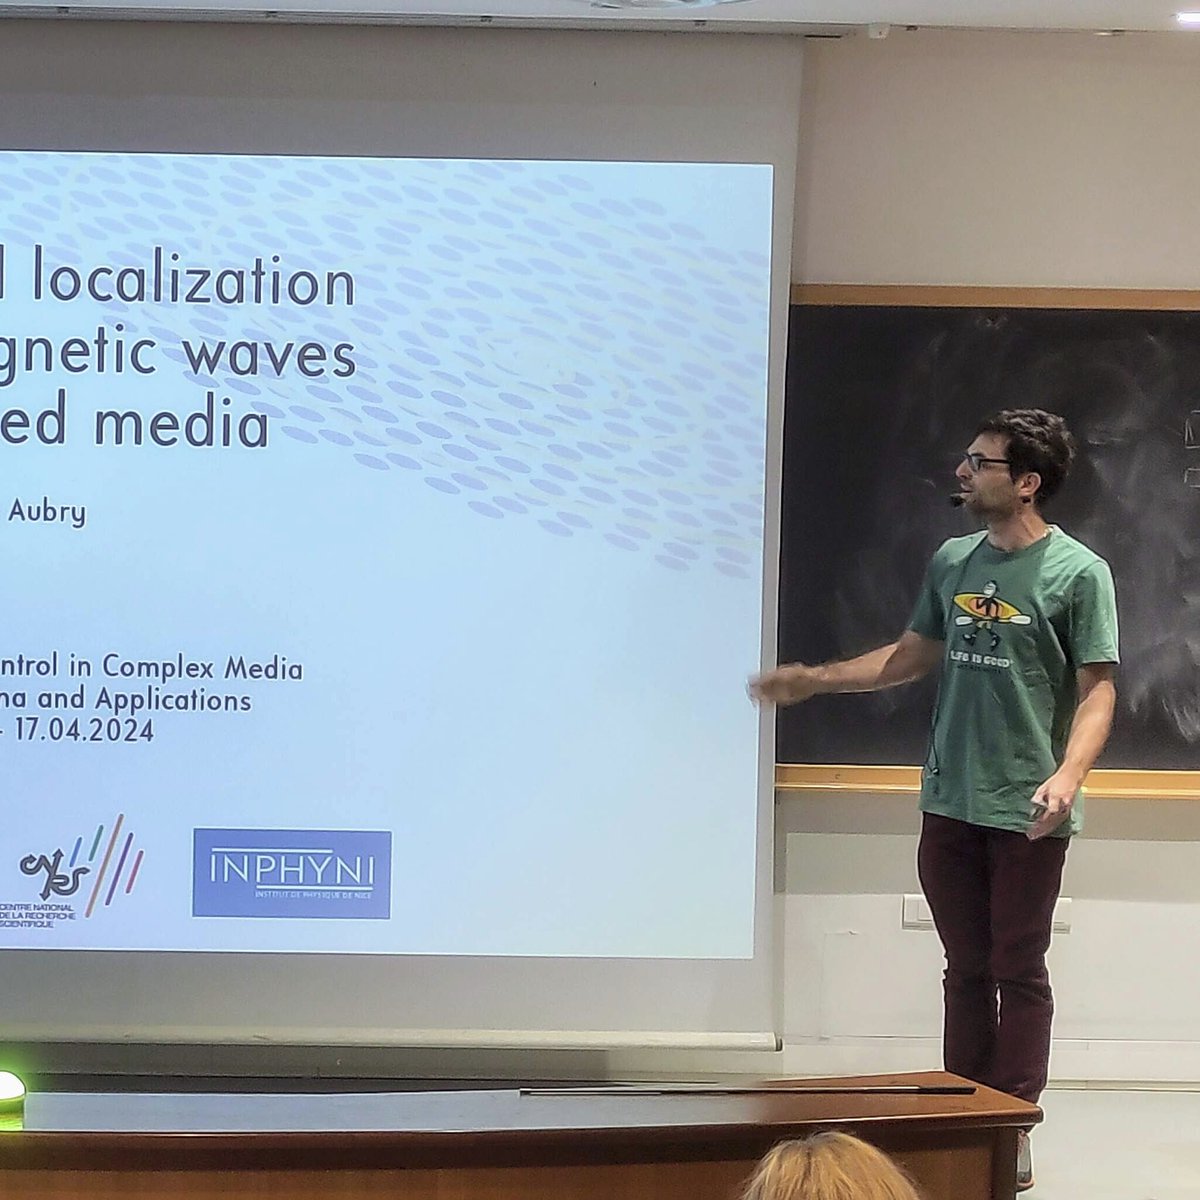 Another day, another great program! This morning:
- Geoffroy Aubry (#INPHYNI @Univ_CotedAzur) on localization in correlated media, 
- Mattis Reisner (@unifr) on topology in 1D systems,
- Christine Fernandez-Maloigne (@I3M_86 @UnivPoitiers) on computational imaging.